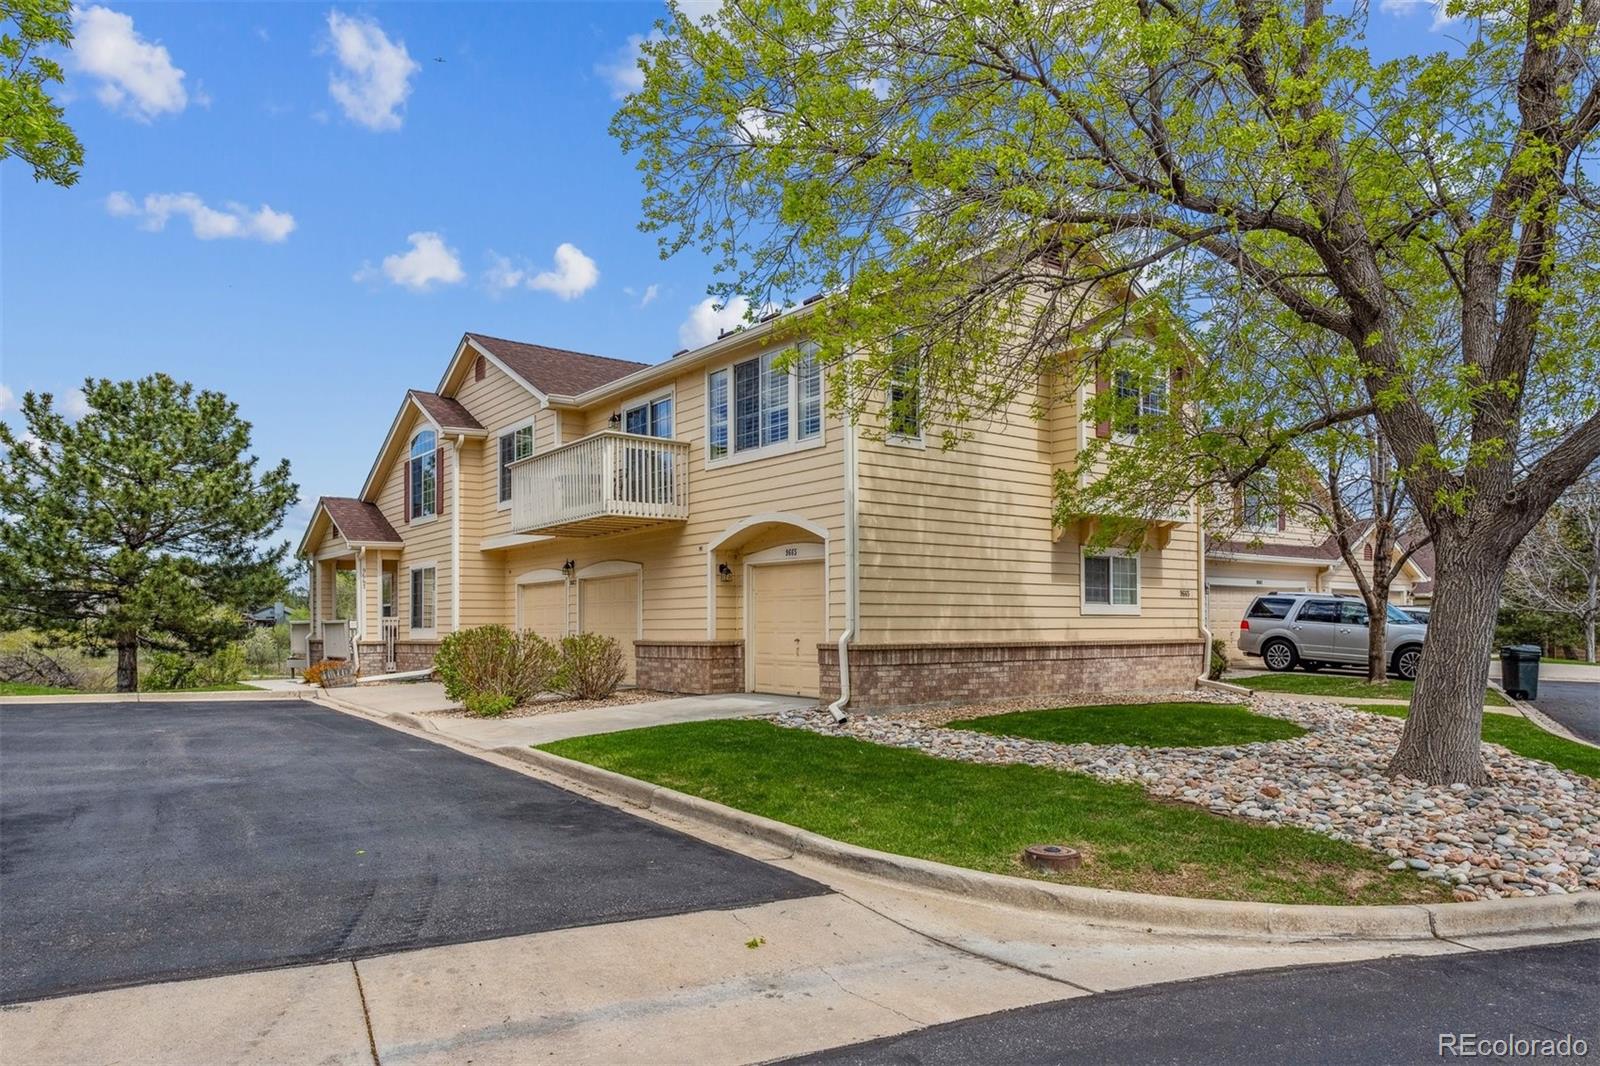 Report Image for 9665  Independence Drive,Broomfield, Colorado